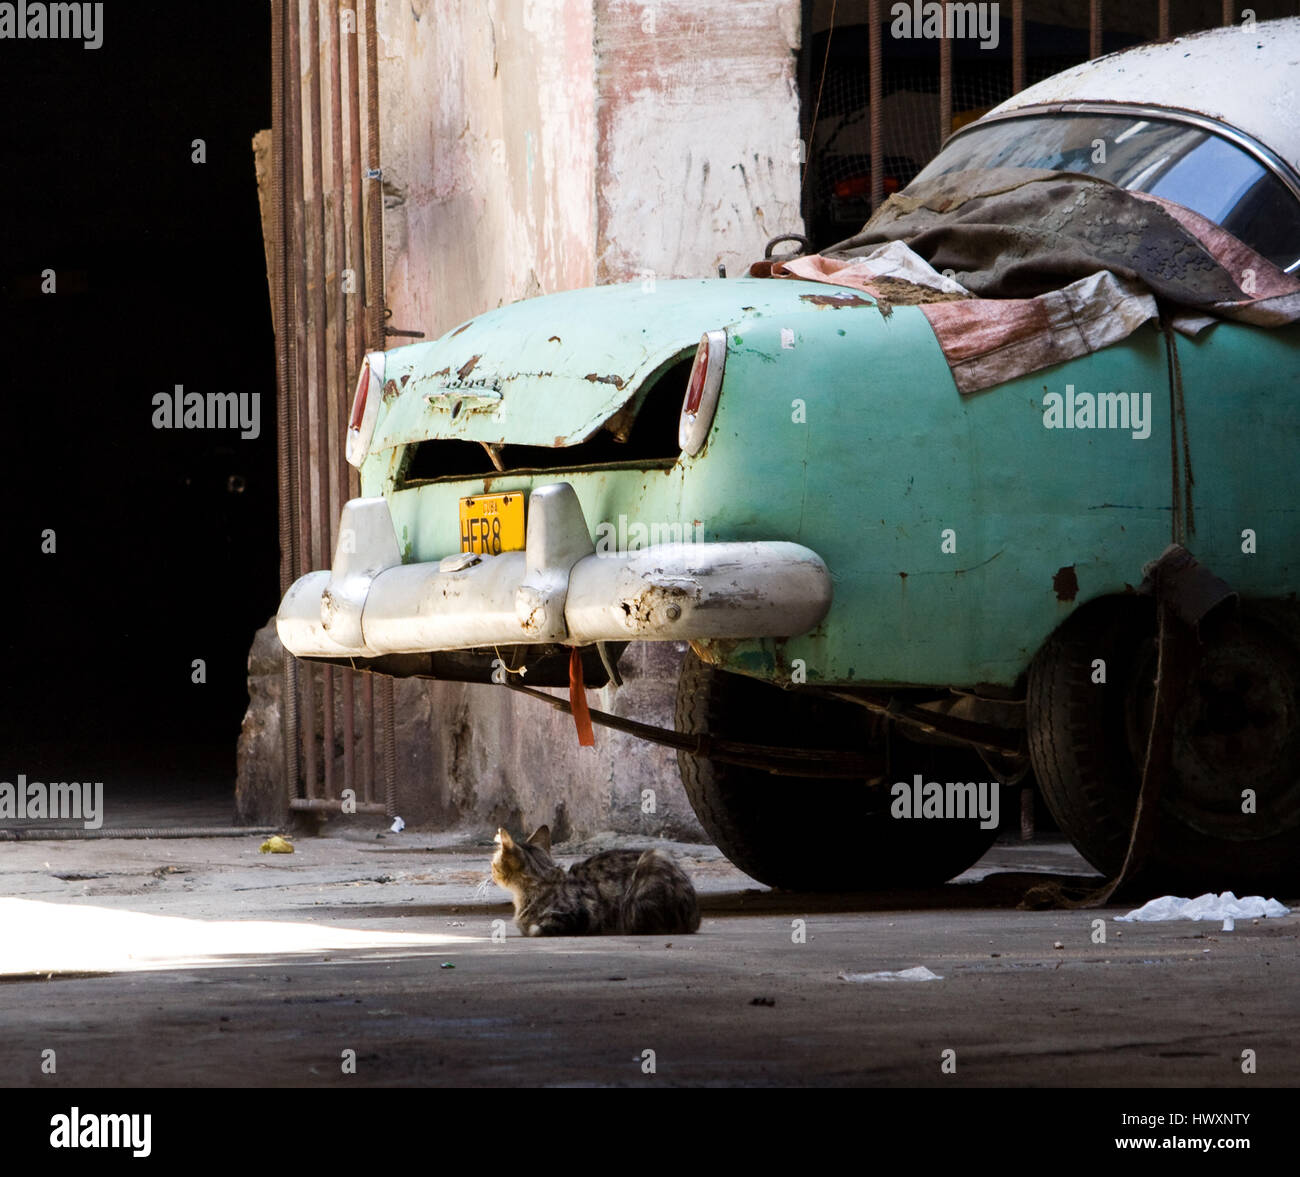 A street cat is laying next to an old car in Cuba. Stock Photo